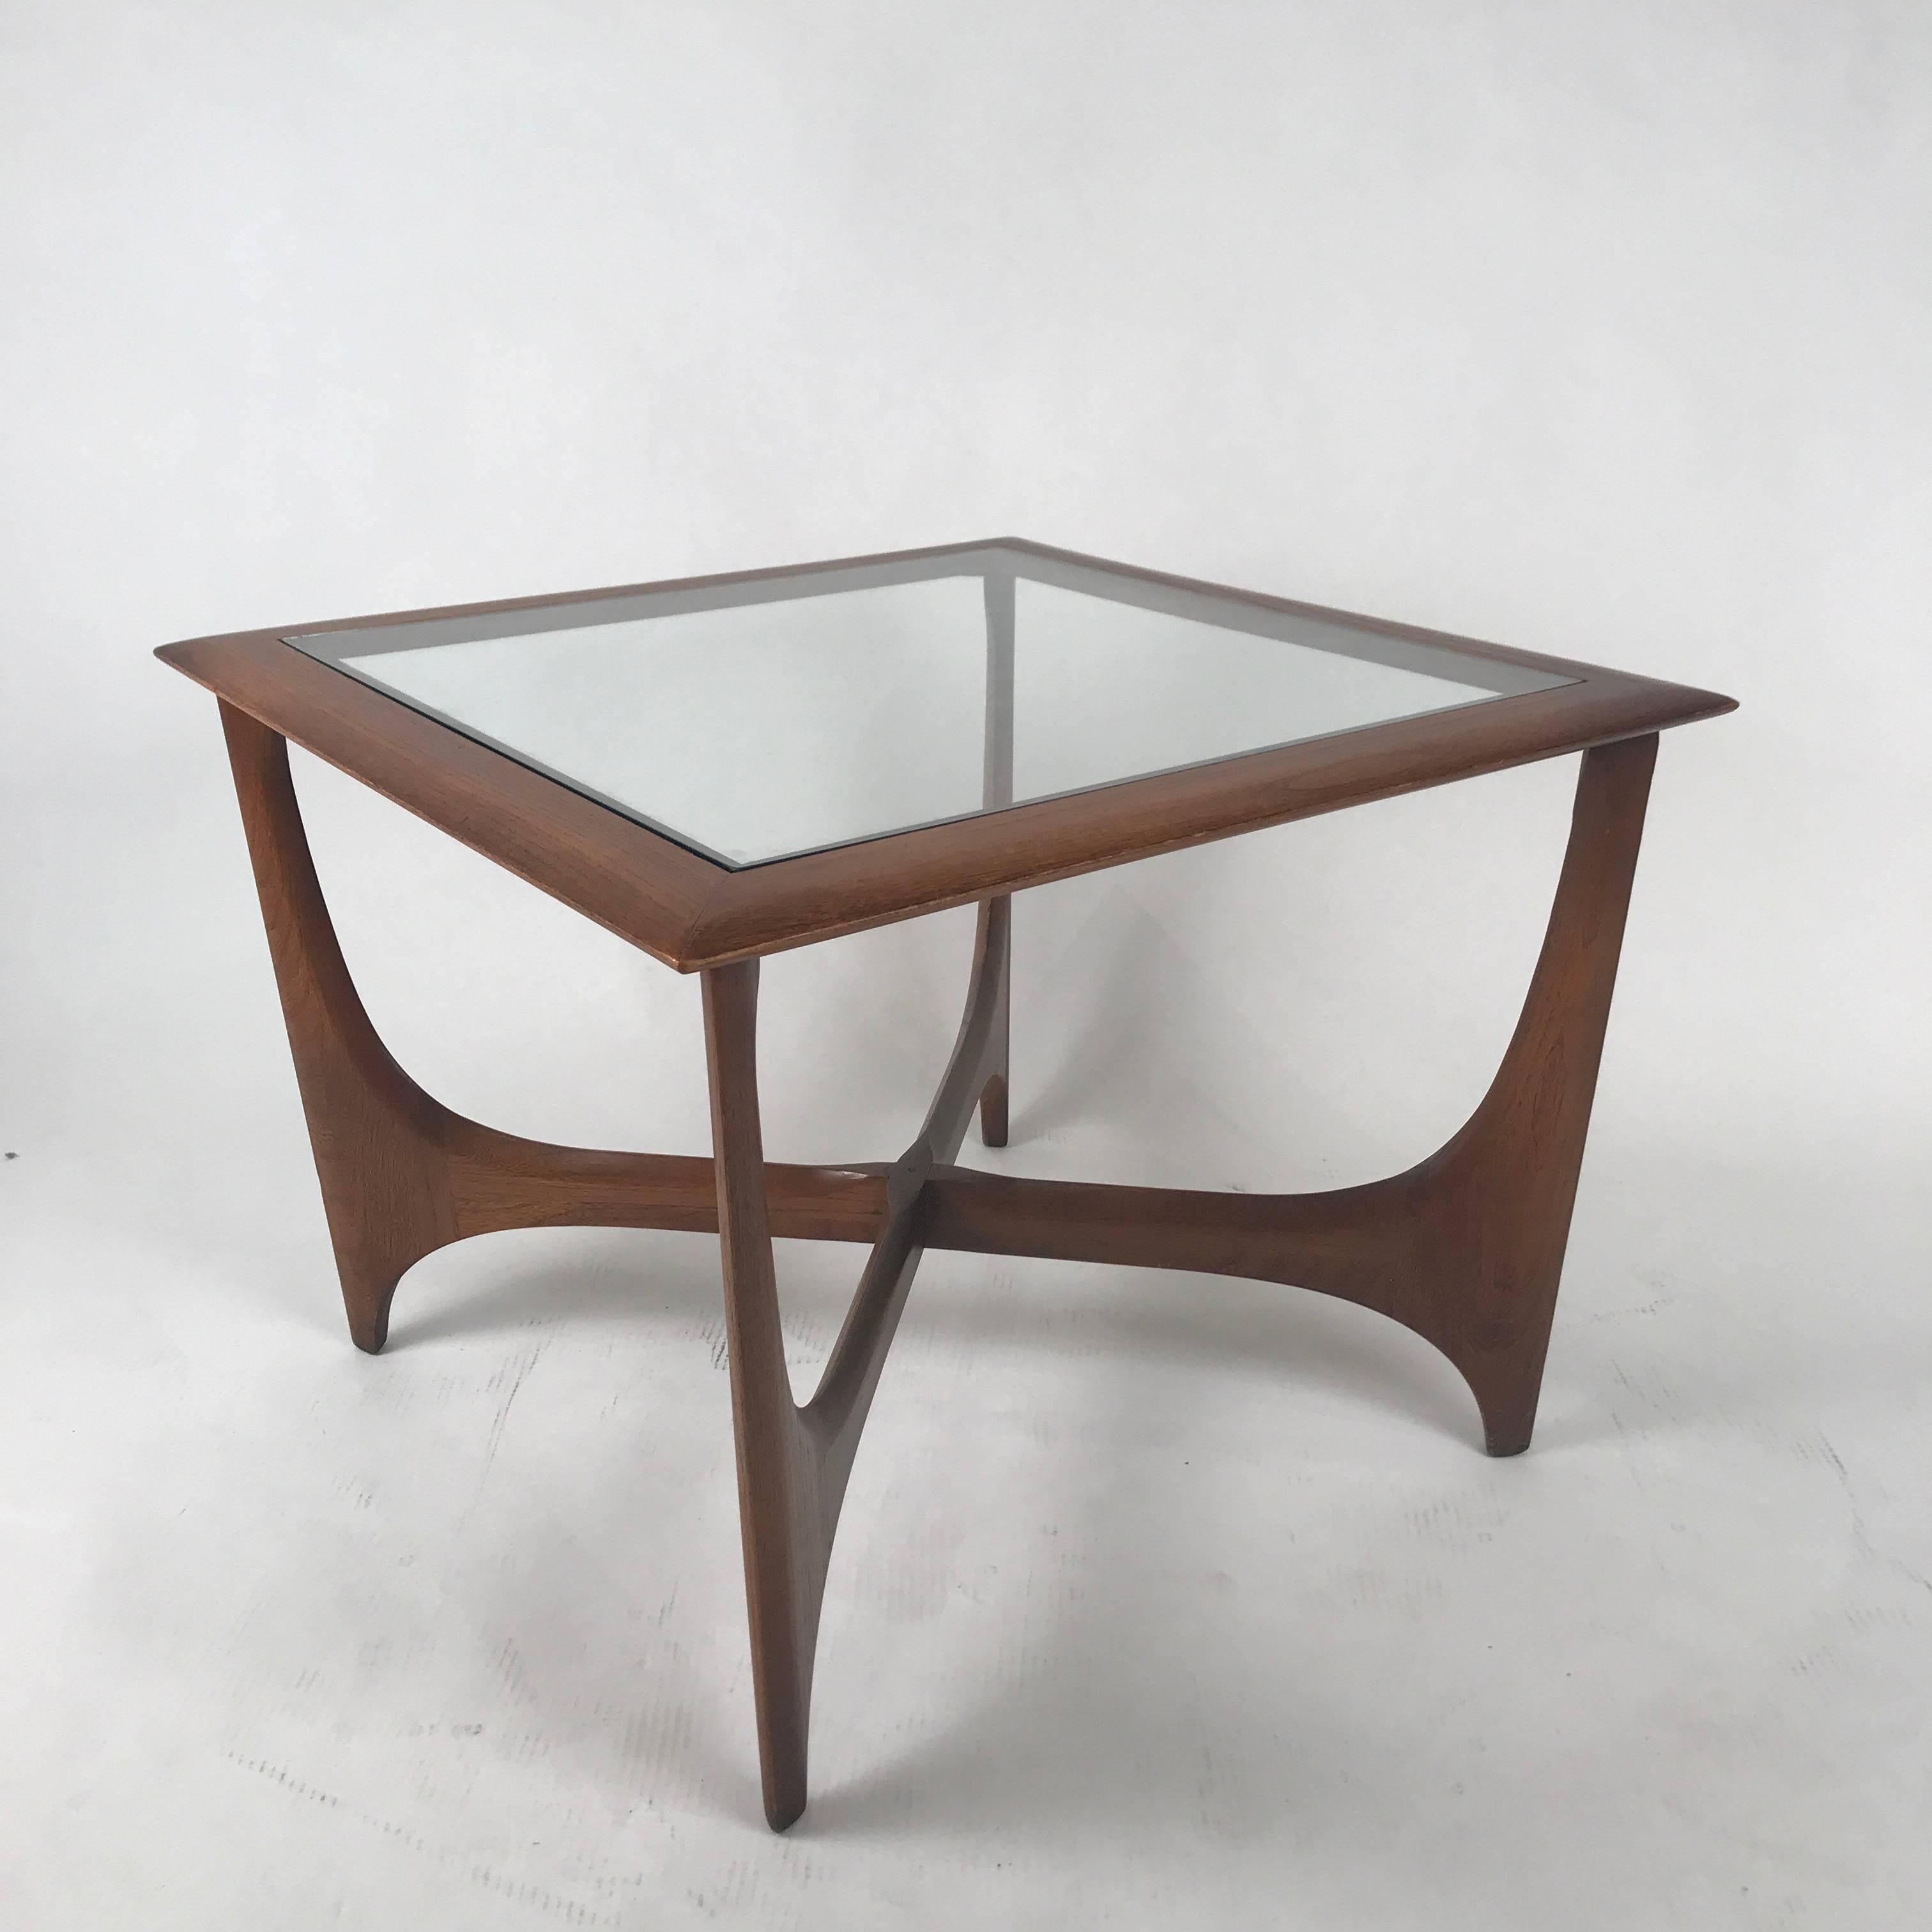 American Sculptural Midcentury Modern Walnut and Glass End or Side Table by Lane, 1967